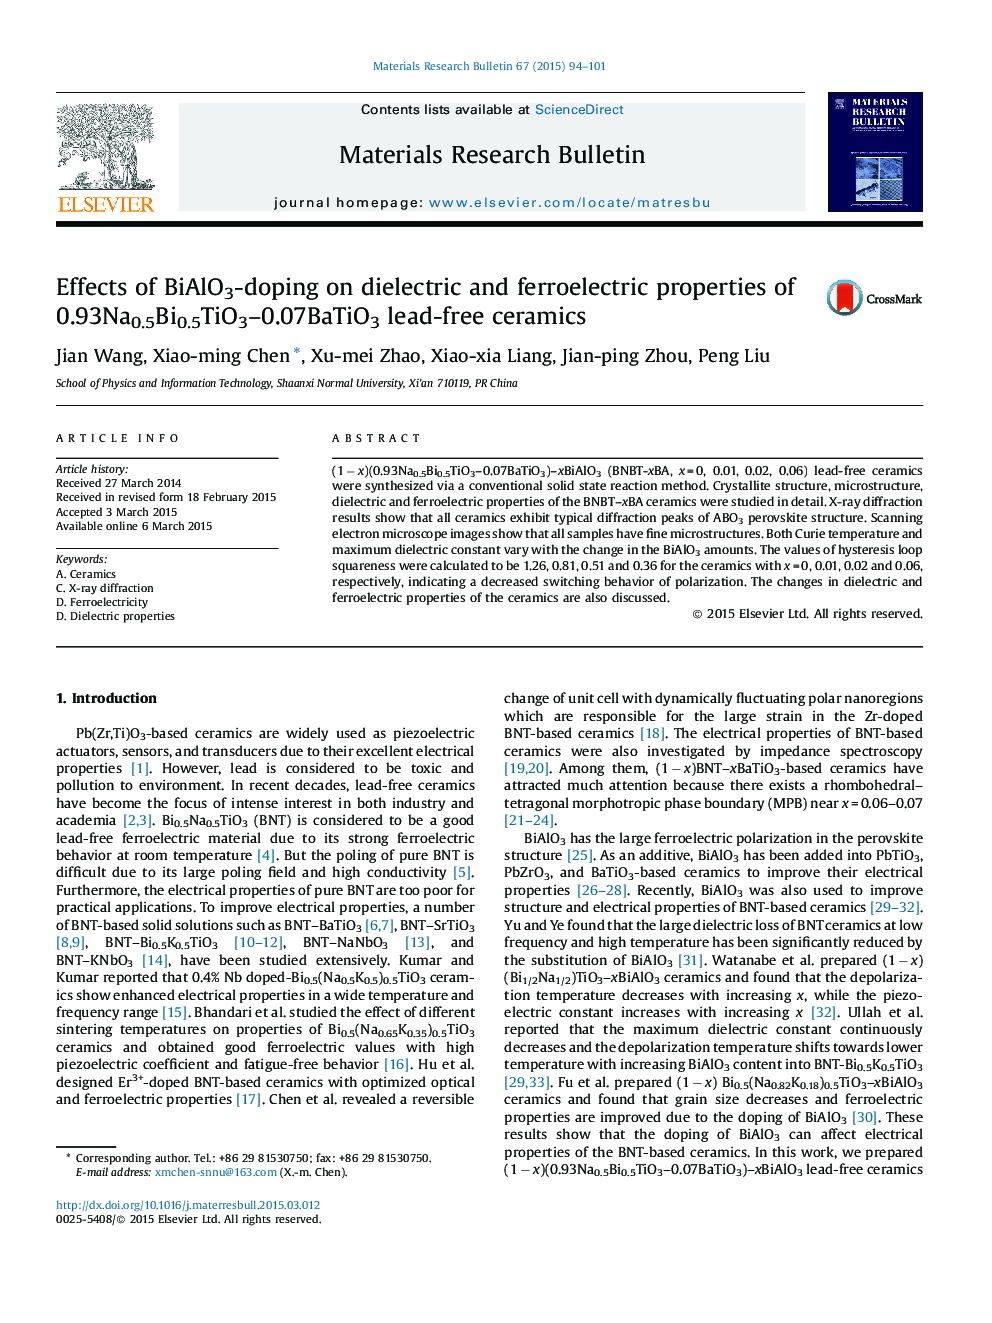 Effects of BiAlO3-doping on dielectric and ferroelectric properties of 0.93Na0.5Bi0.5TiO3-0.07BaTiO3 lead-free ceramics